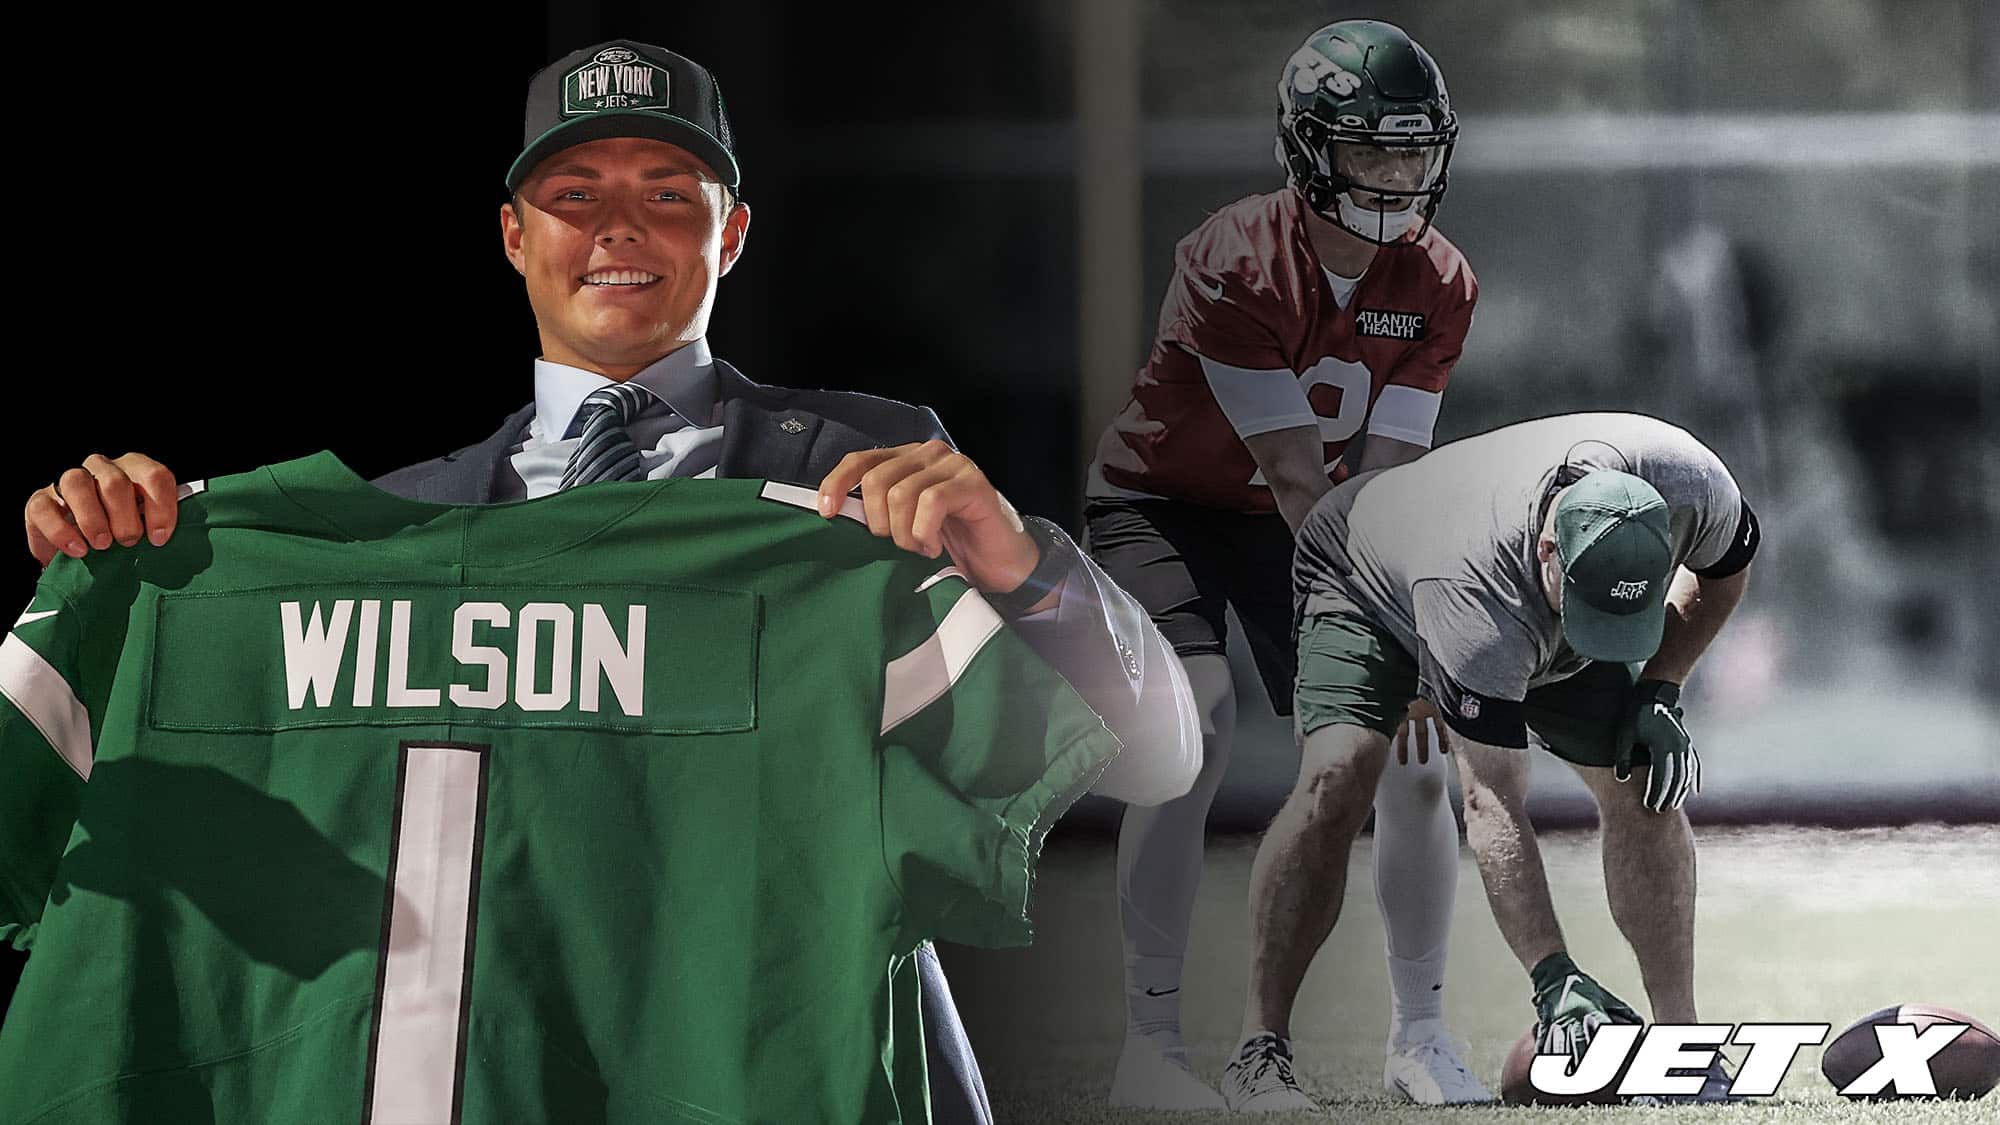 Zach Wilson poses with his New York Jets jersey on draft night, and is also taking snaps at OTAs.